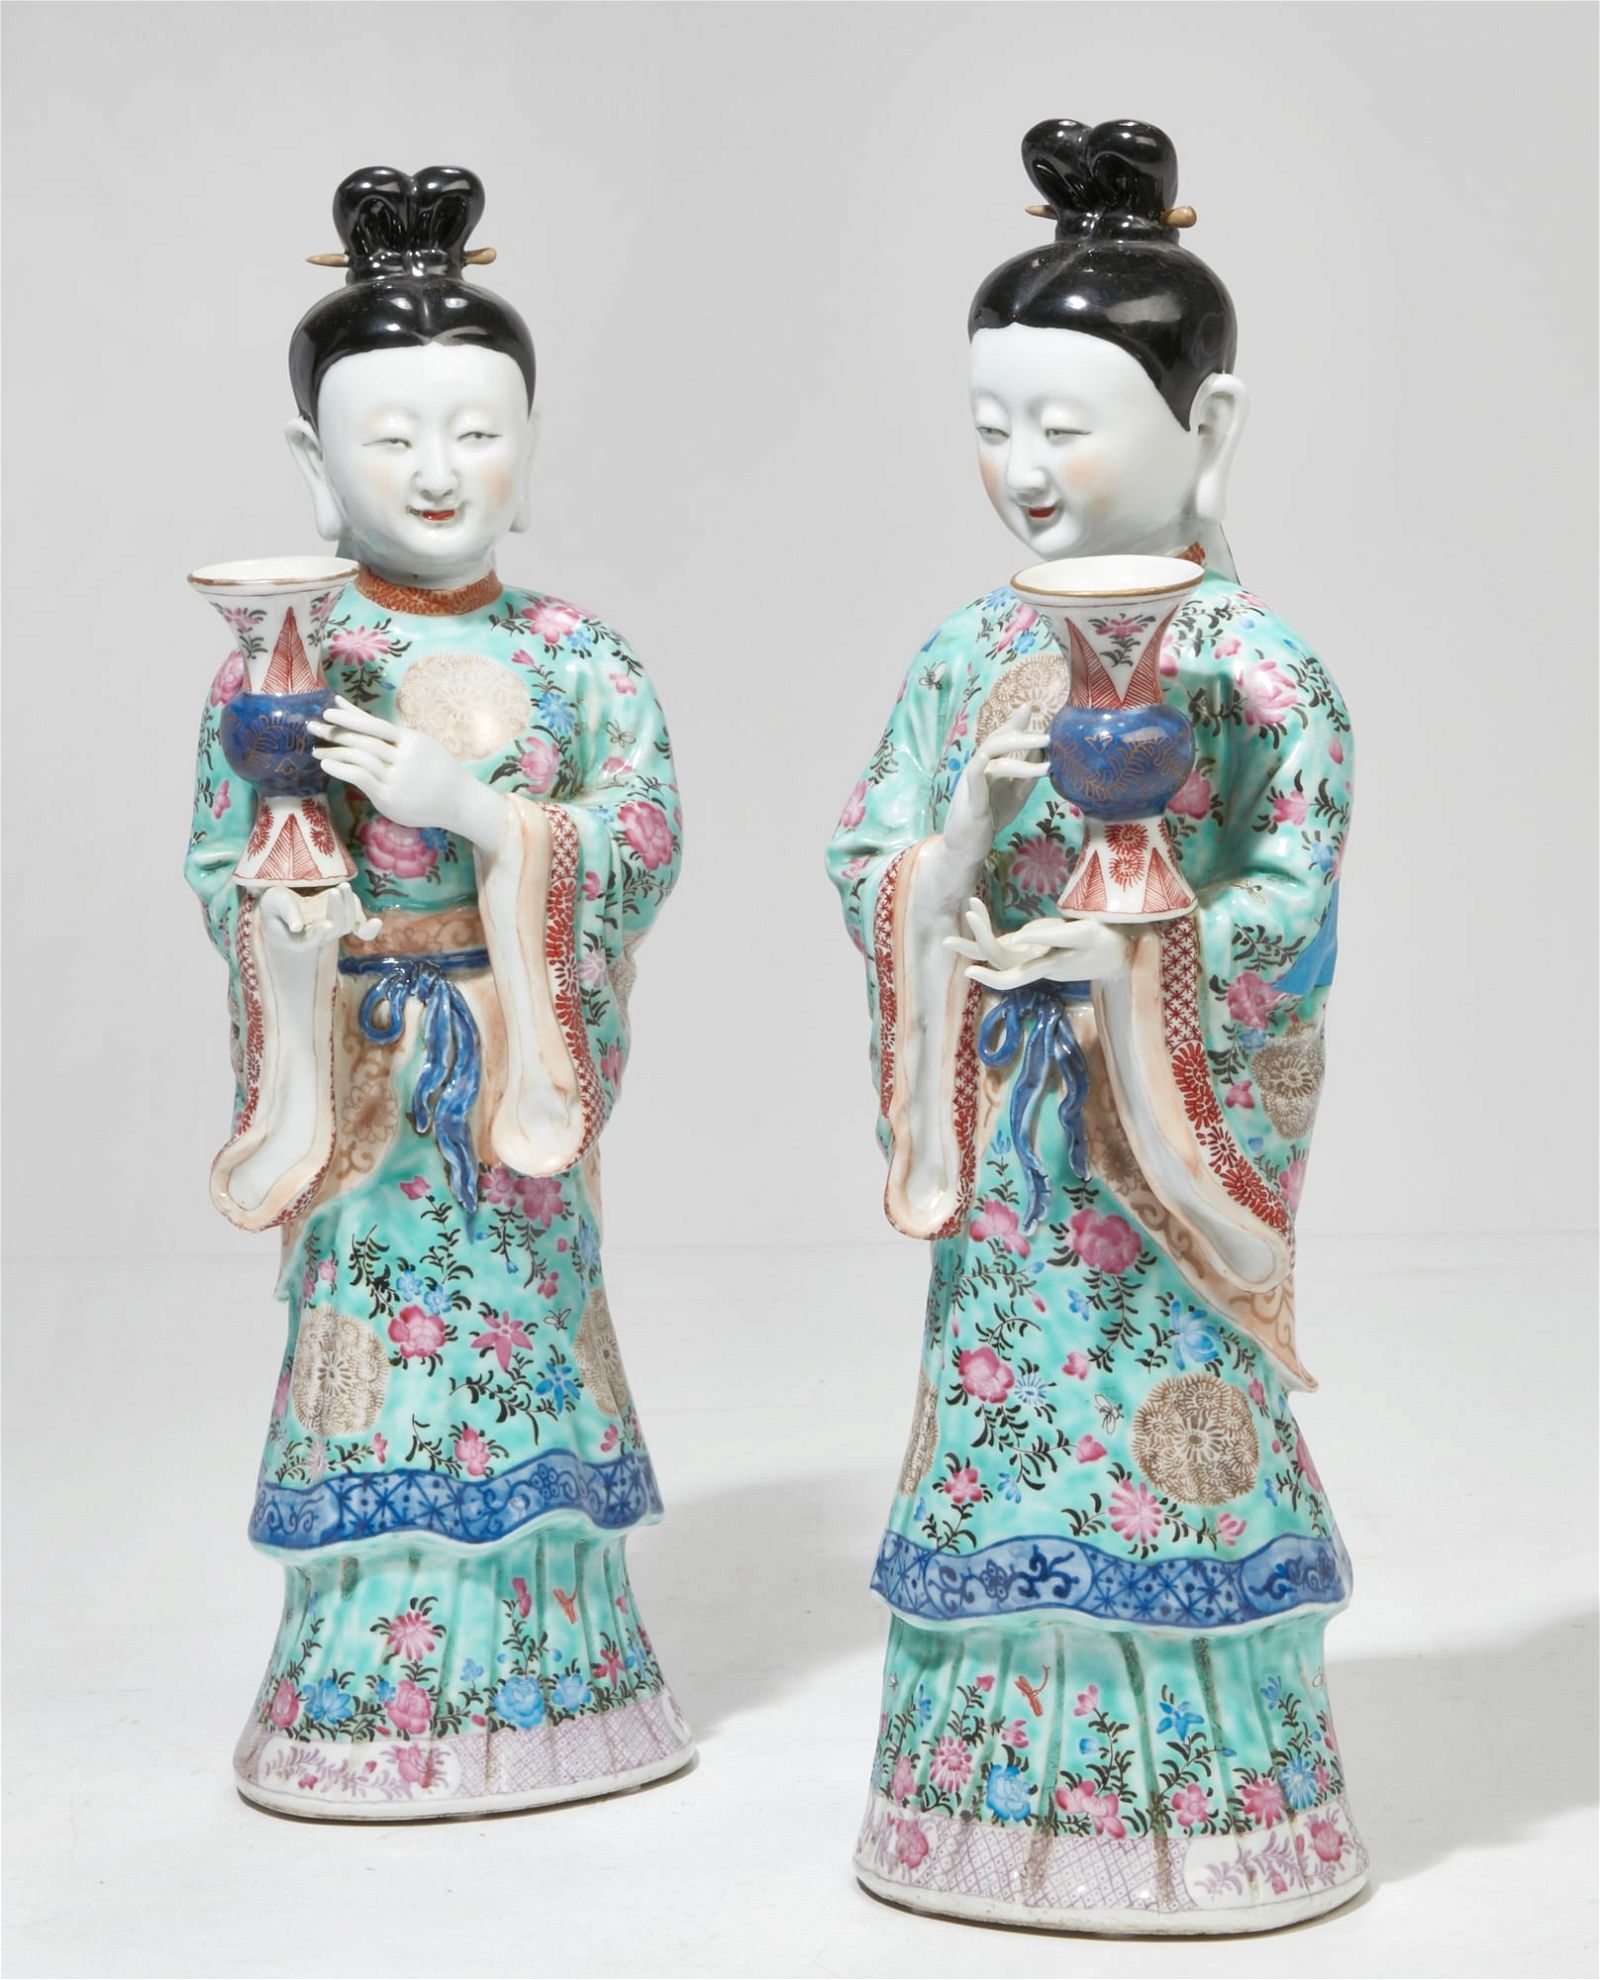 A PAIR OF CHINESE PORCELAIN FIGURAL